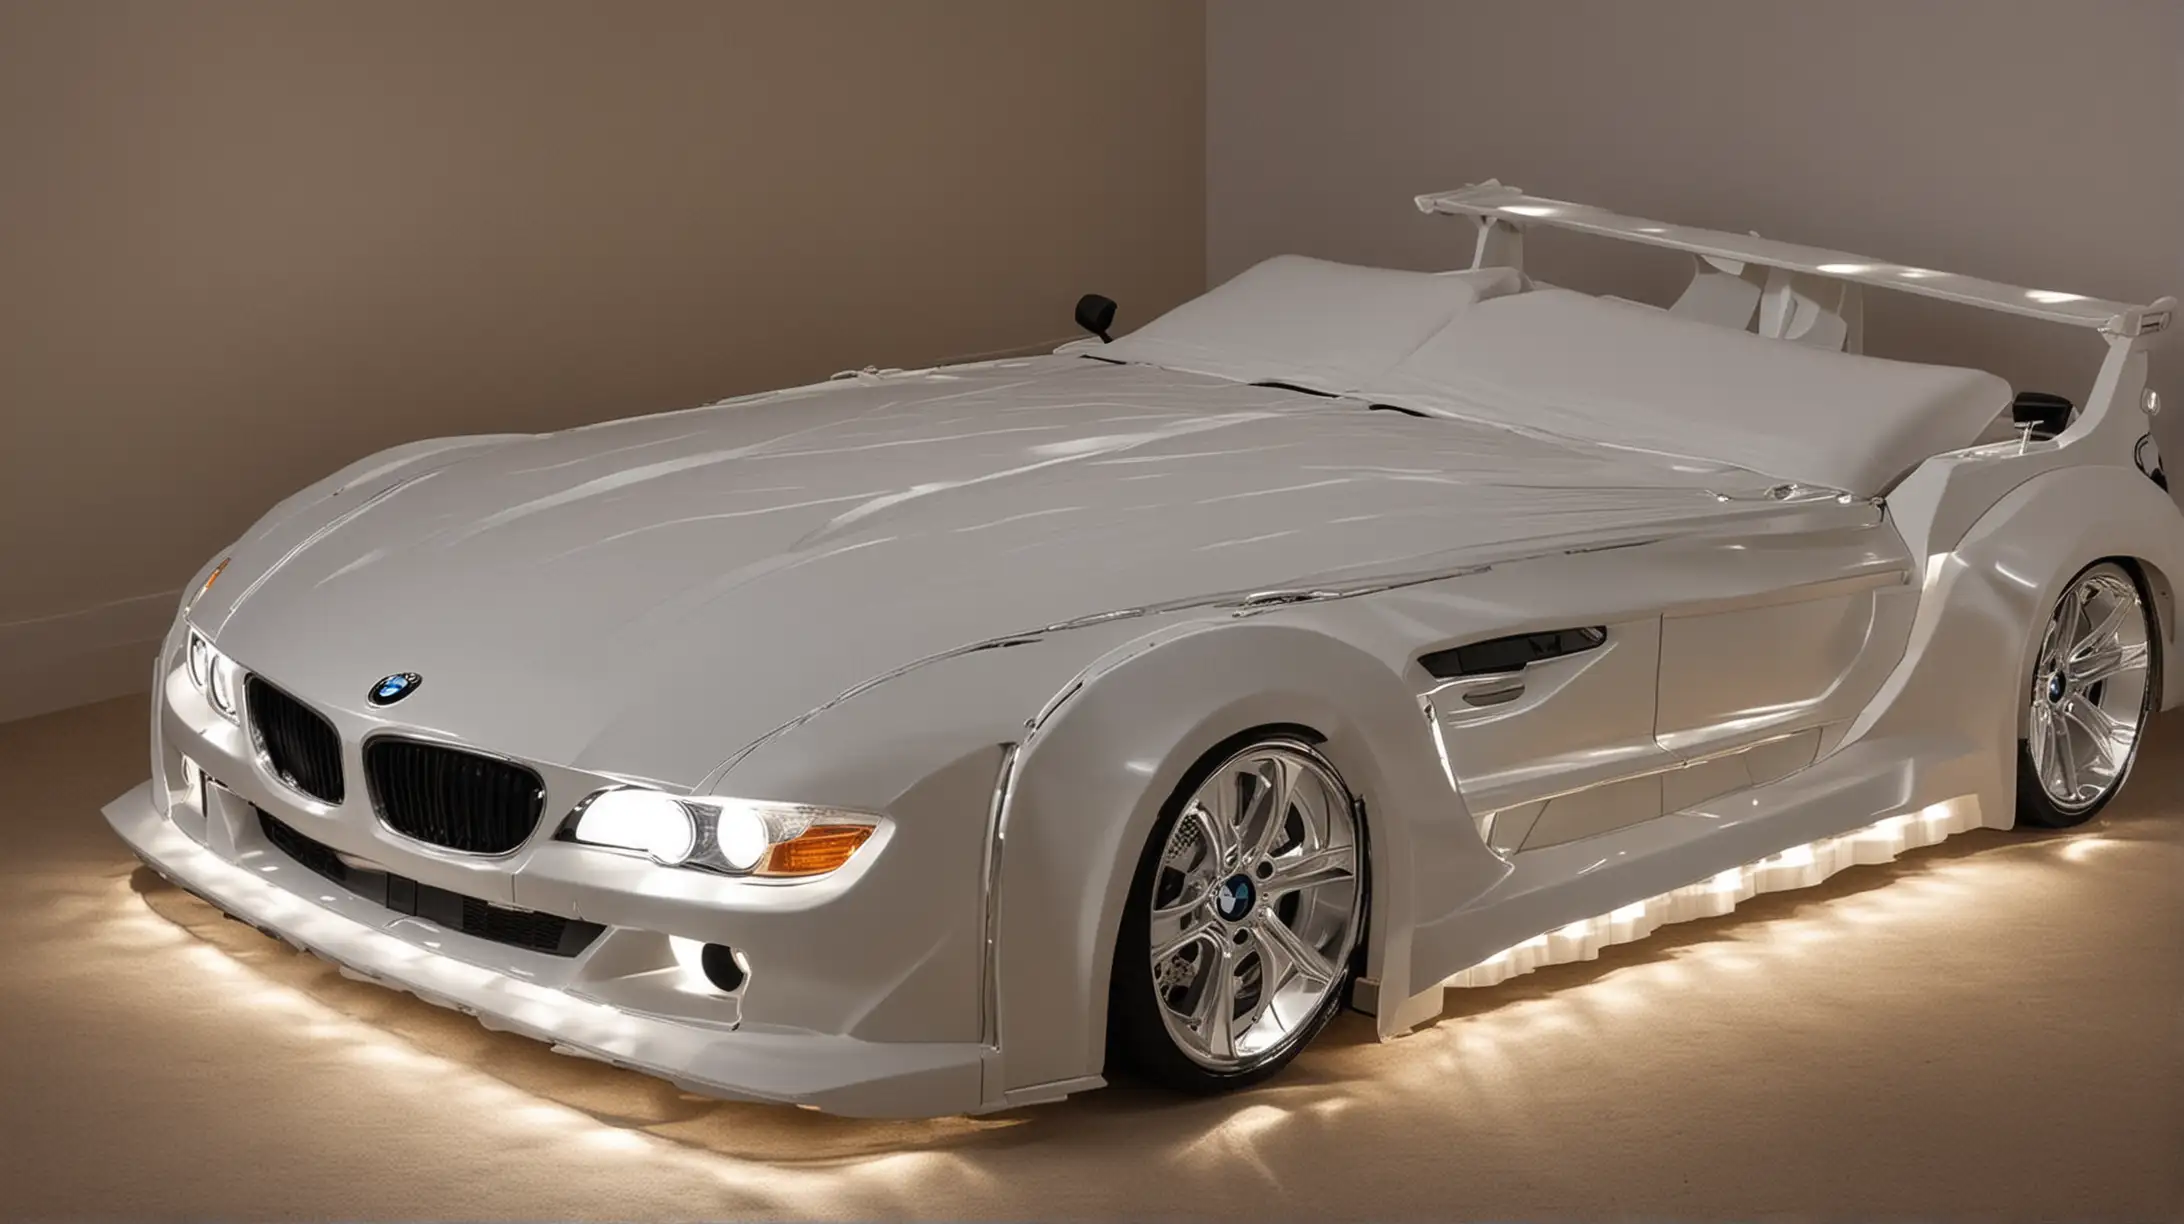 Luxurious Double Bed Shaped like a BMW Car with Illuminated Headlights